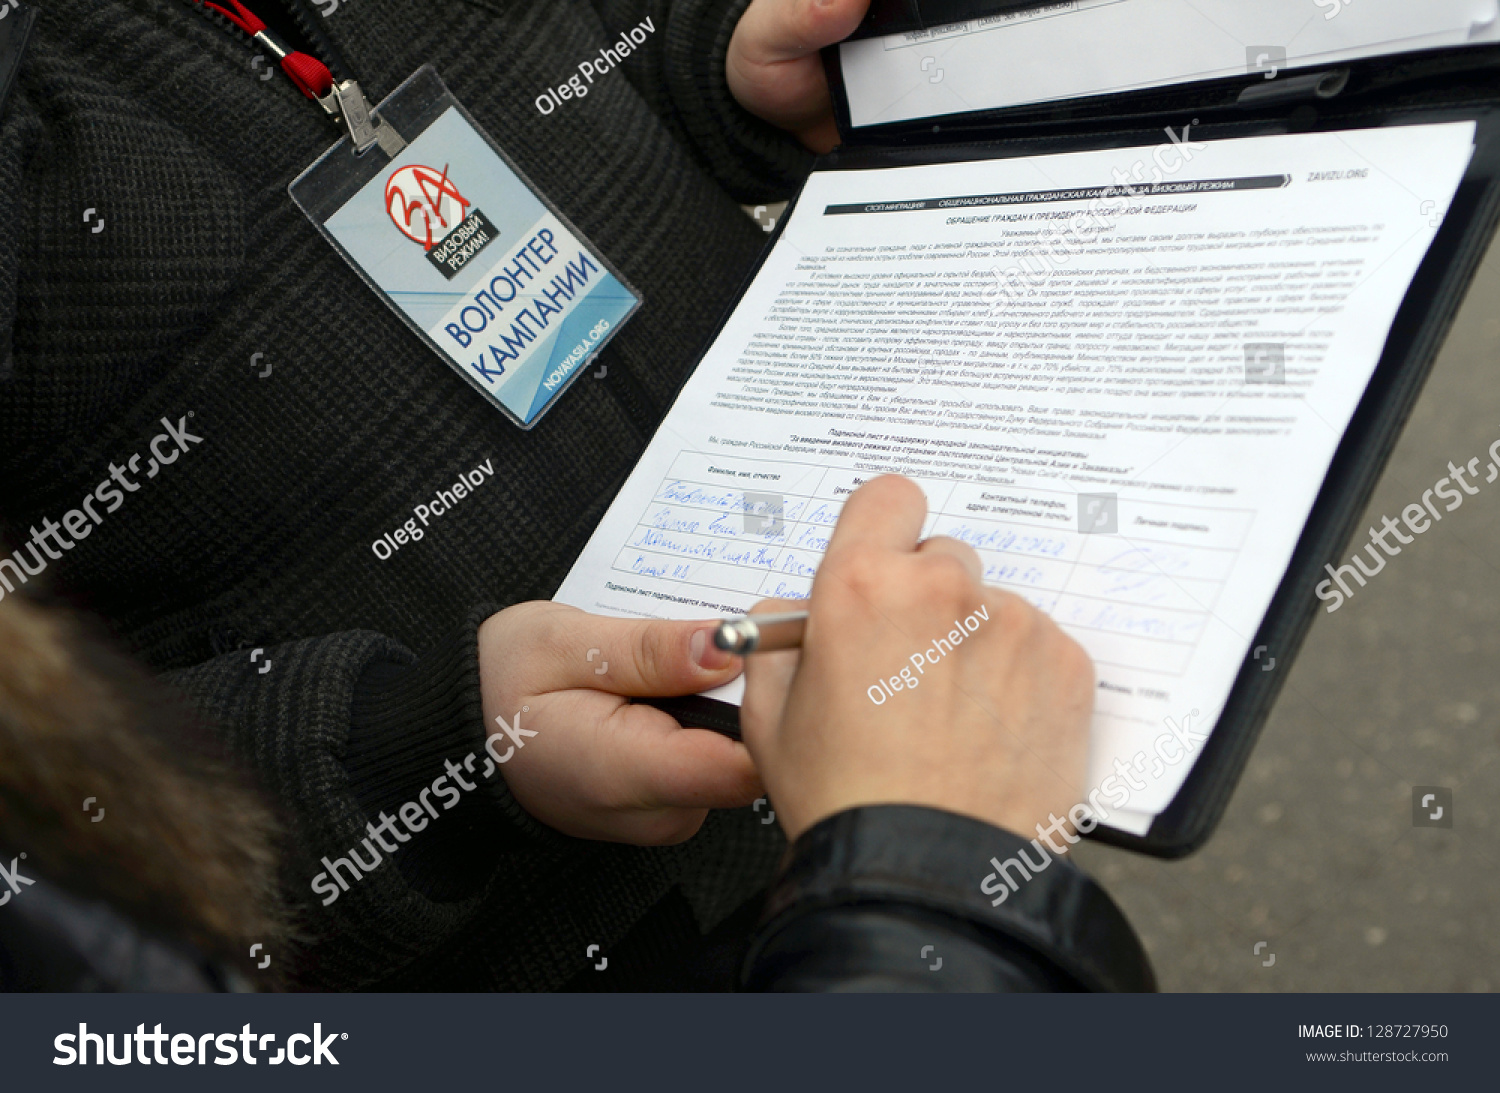 Rostovondon Russia February 17 Picket Collect Stock Photo Edit Now